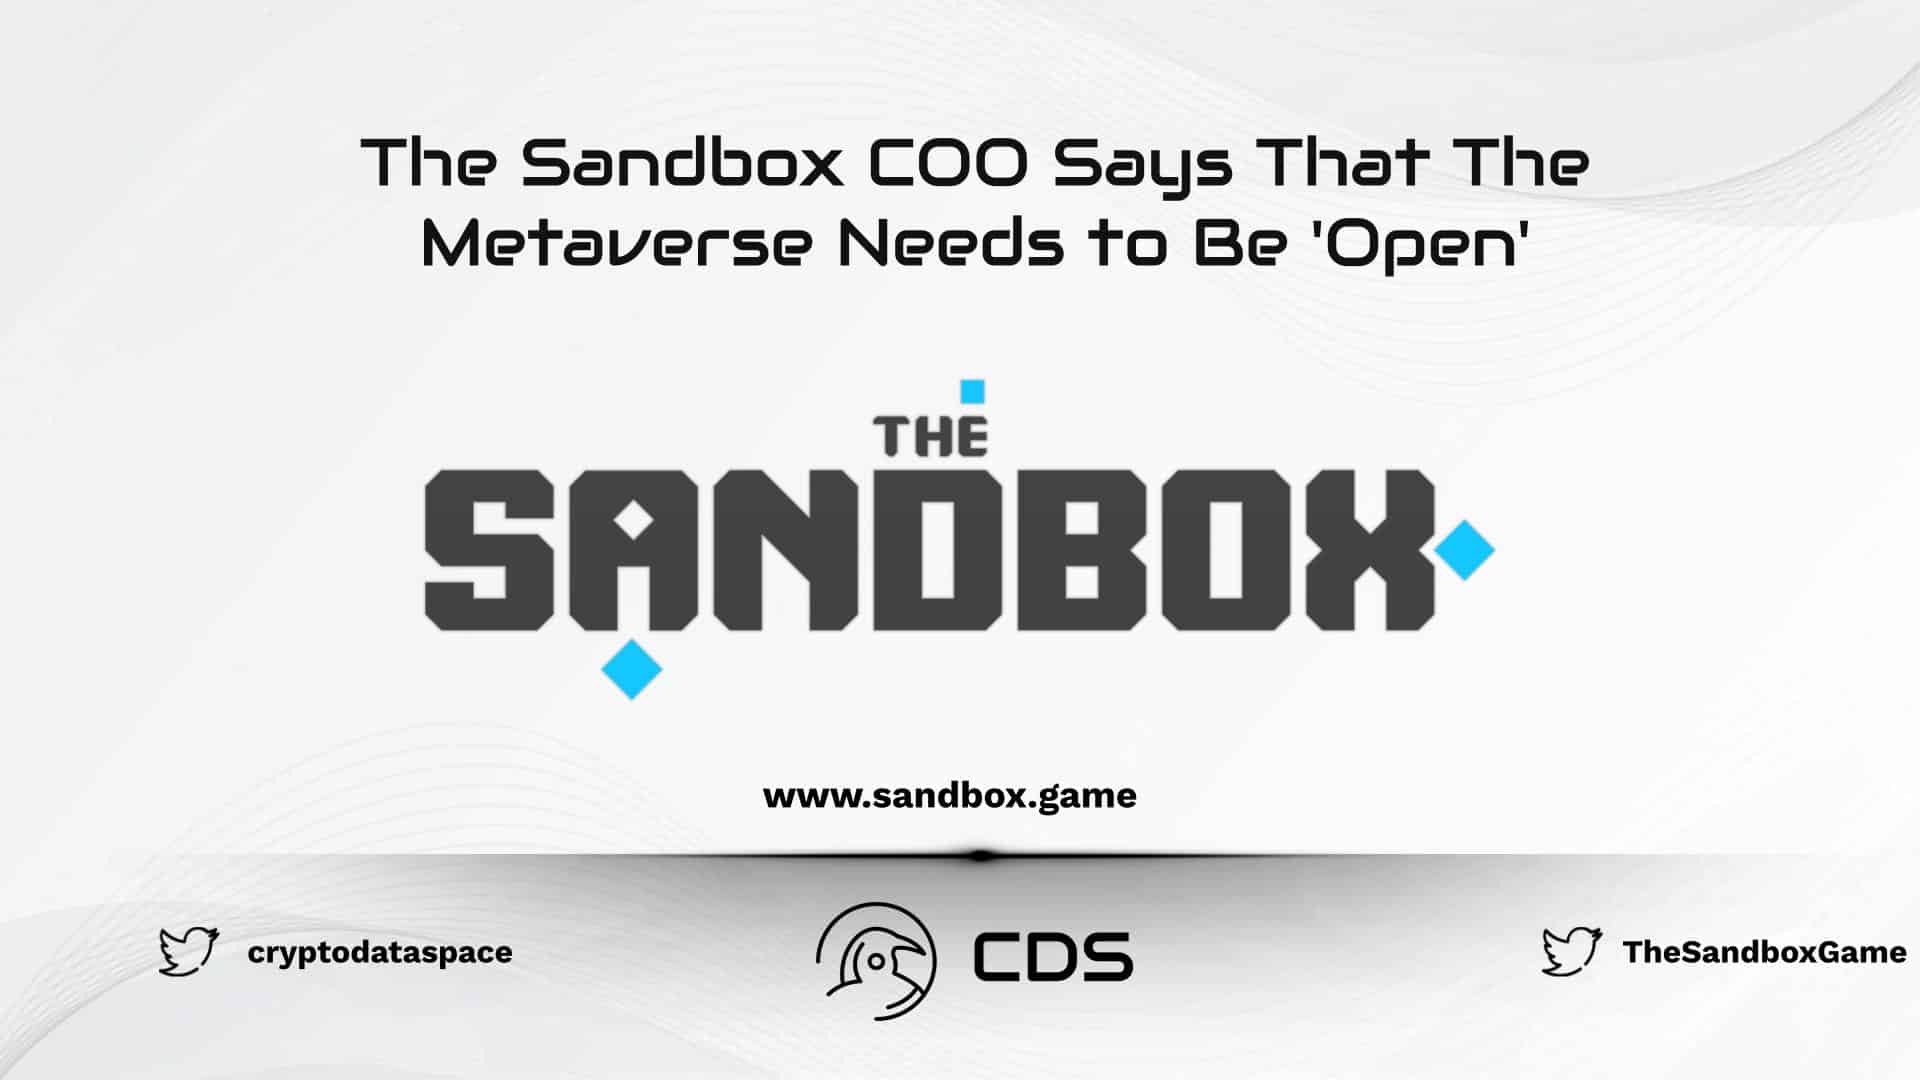 The Sandbox COO Says That The Metaverse Needs to Be 'Open'